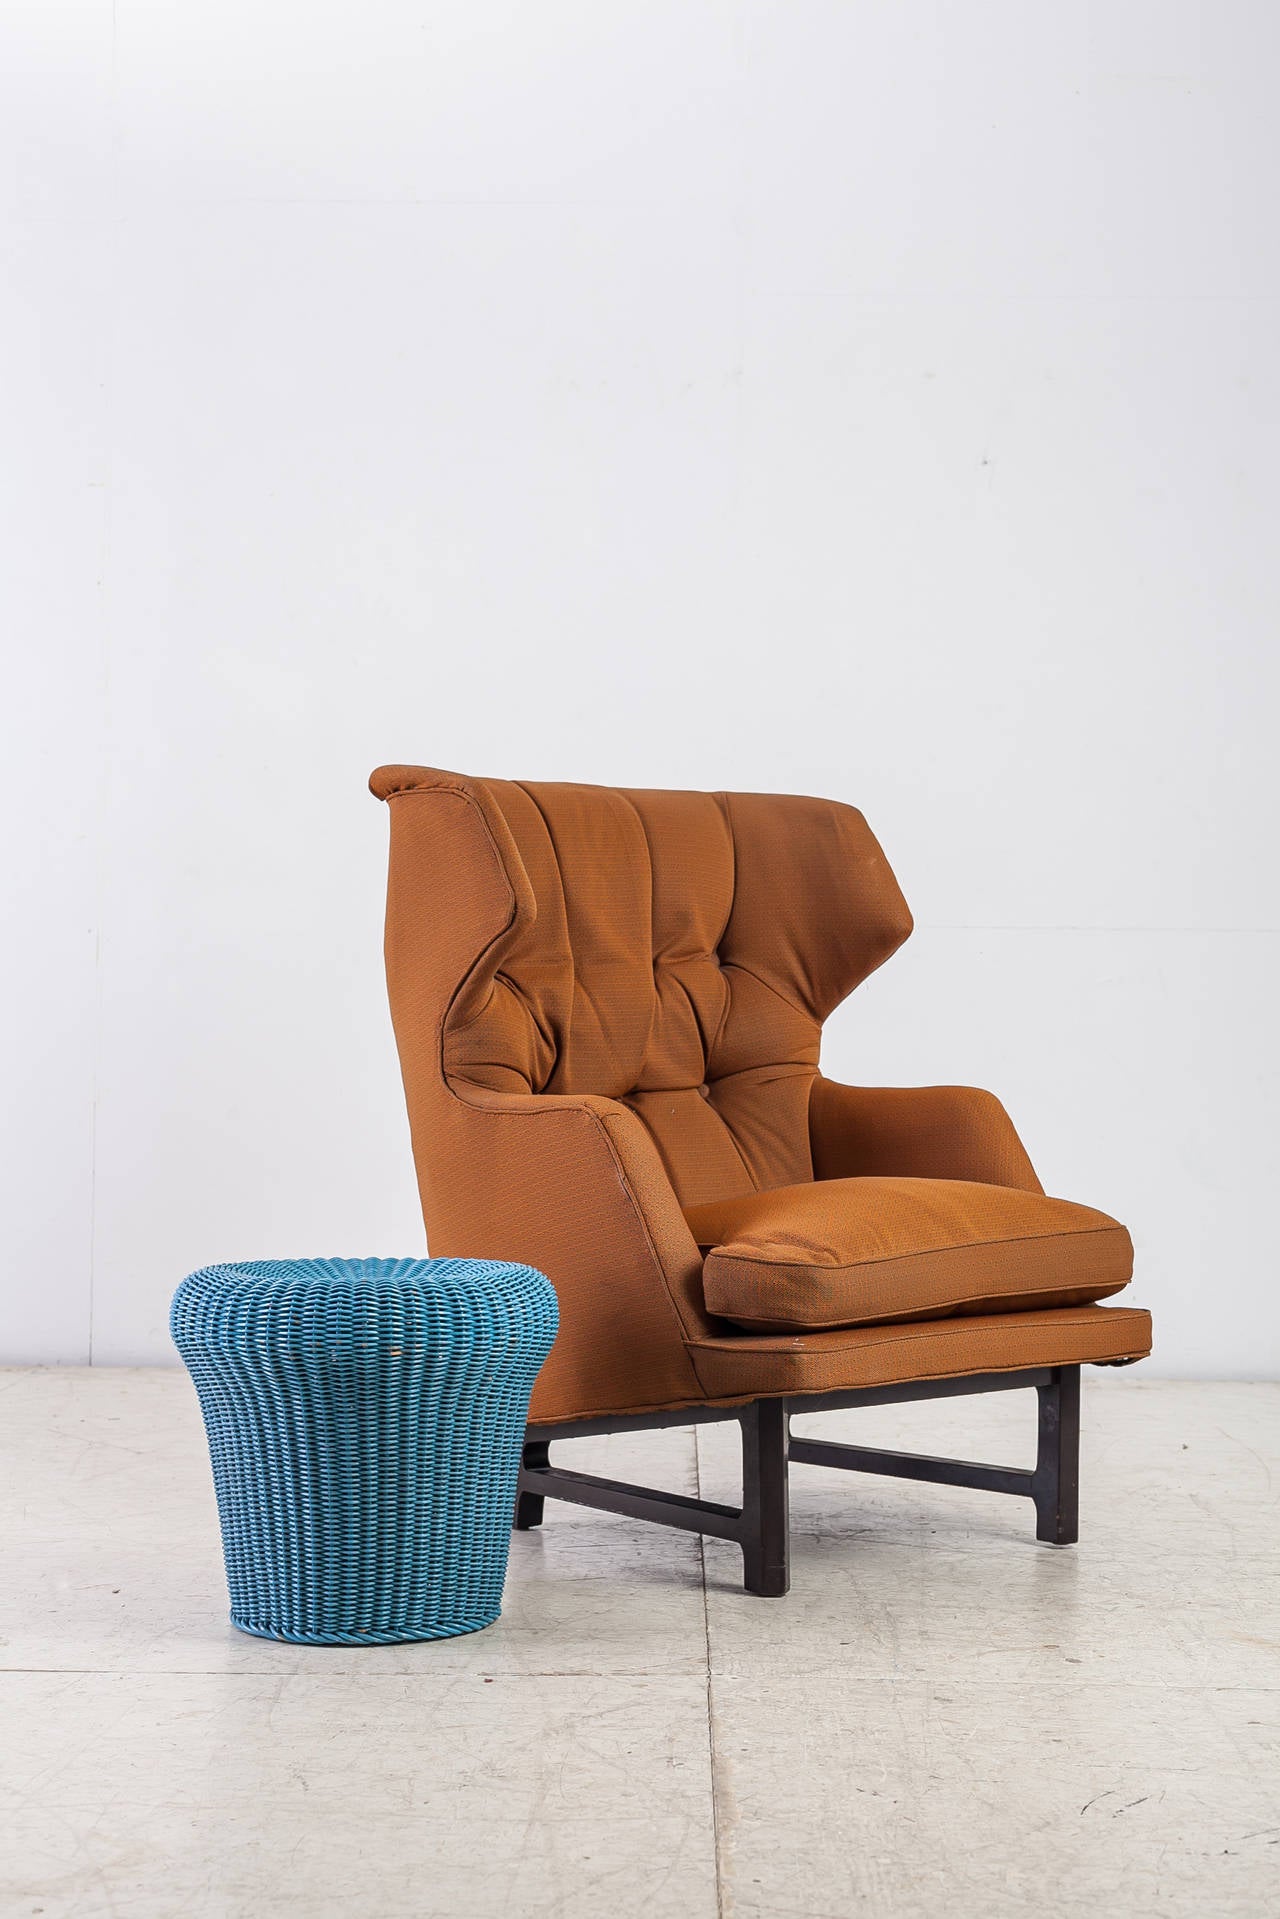 An Edward Wormley wingback lounge chair with a brown fabric upholstery. This chair was designed in 1957 for the 'Janus' series. It is both a stunning piece and a very comfortable chair in a great condition, with the original upholstery. Upholstery